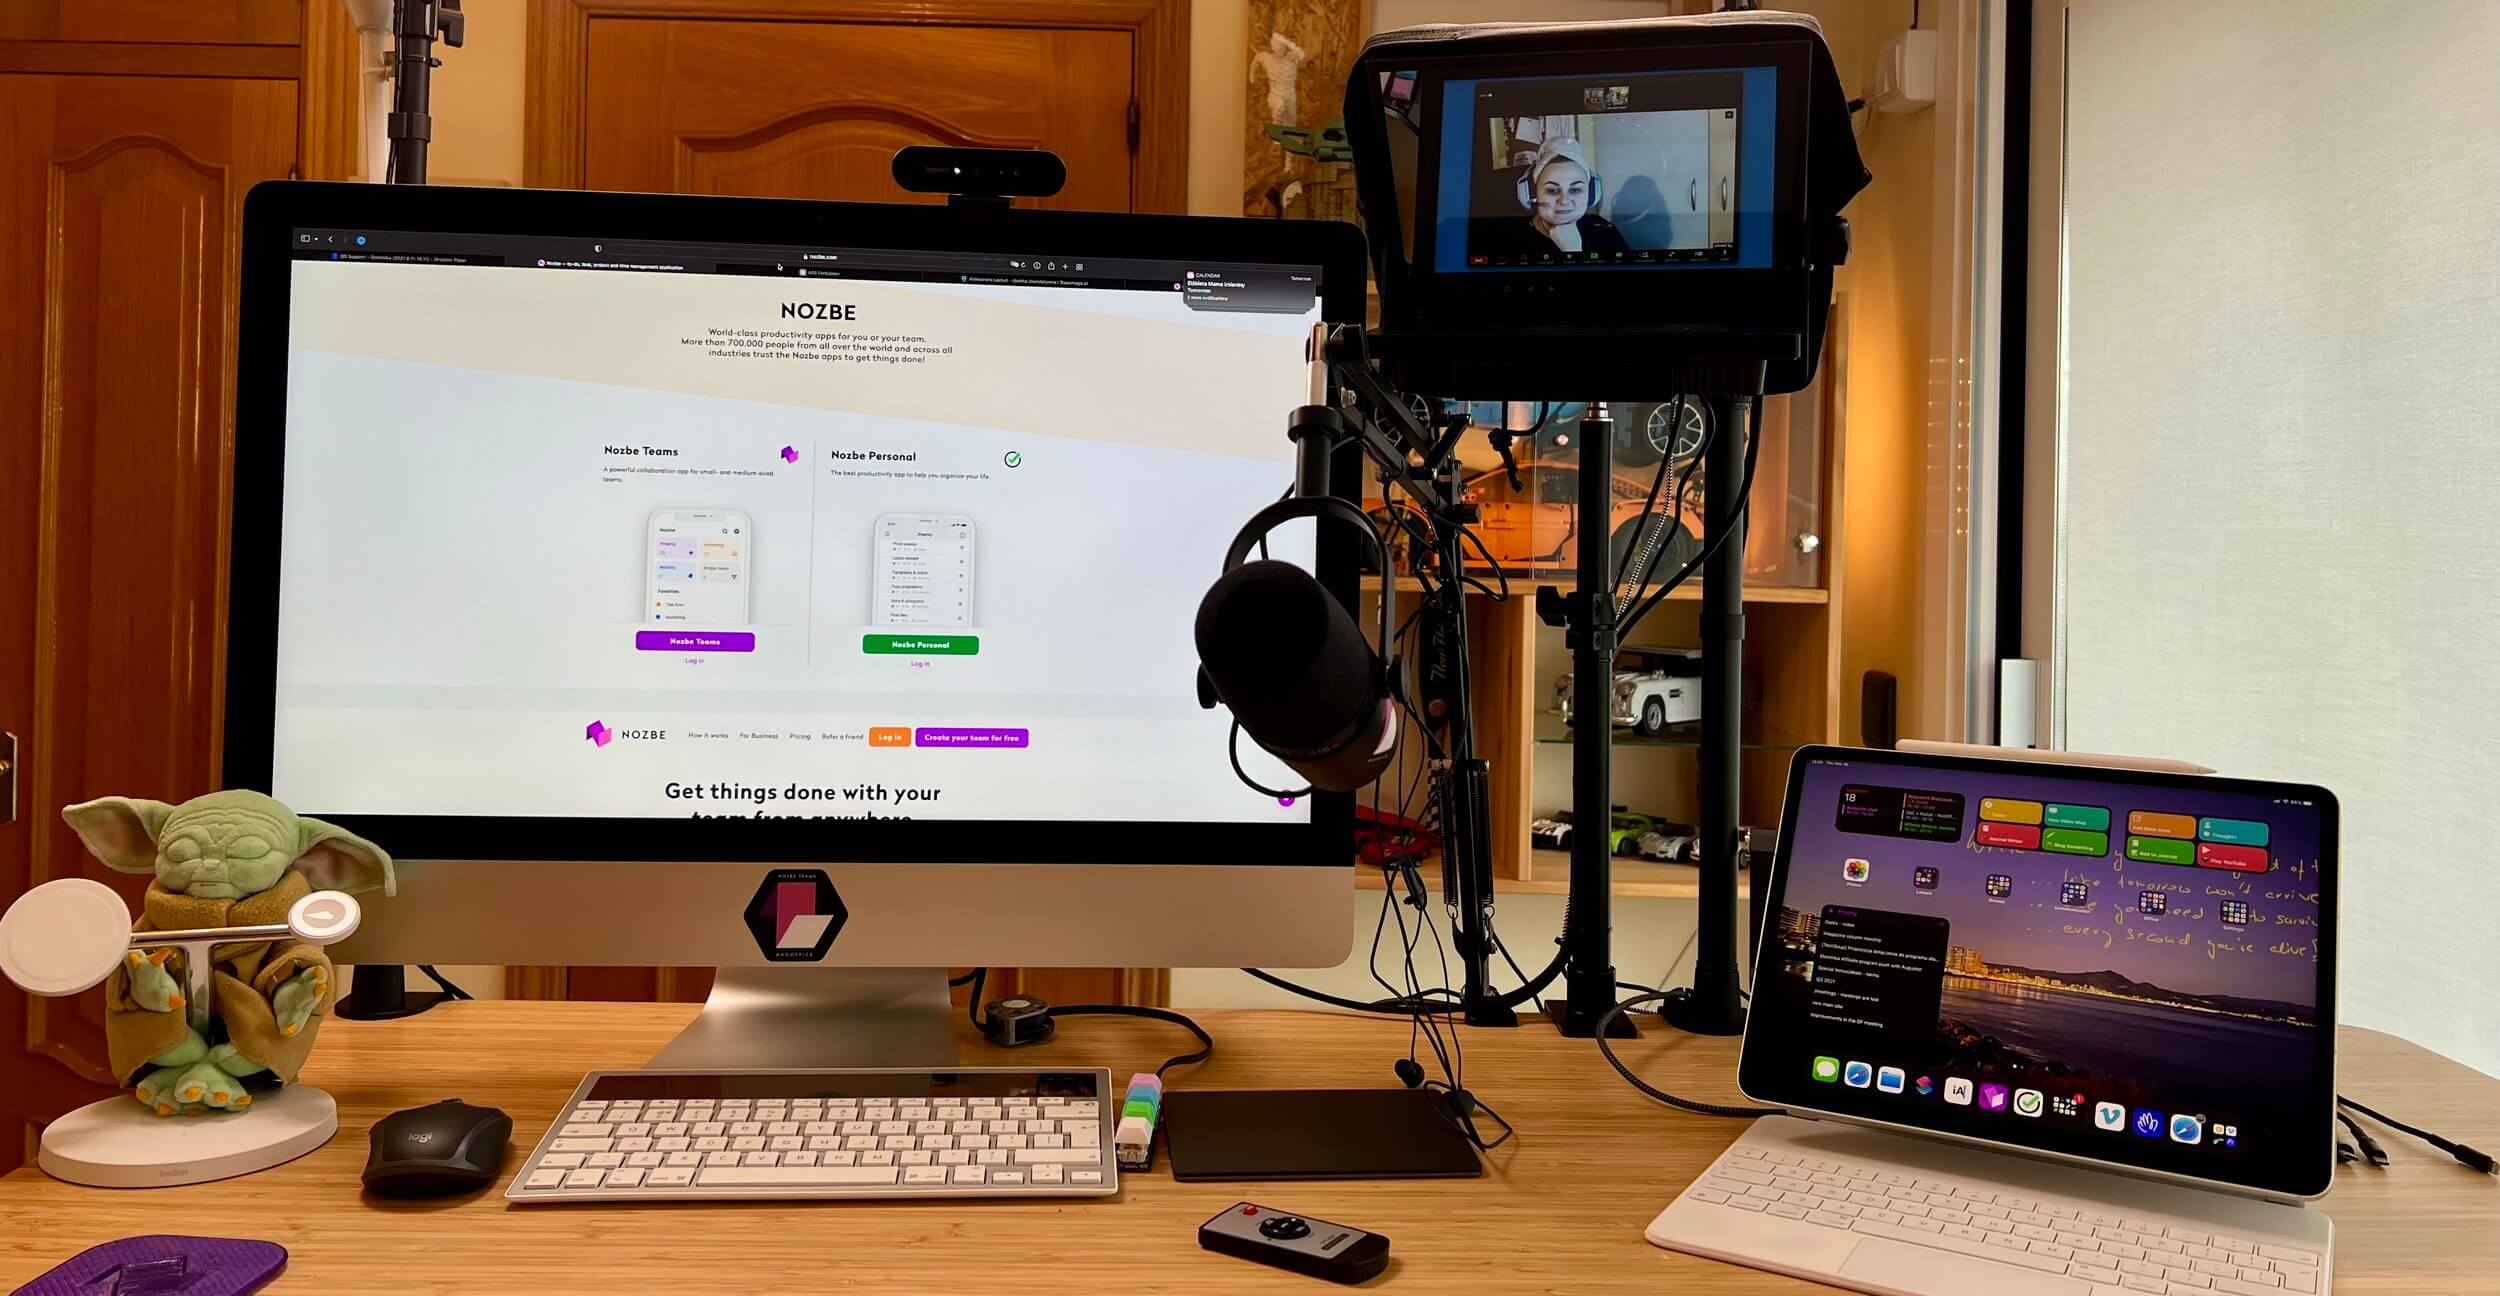 Perfect zoom meeting setup or streaming kit in my new home office